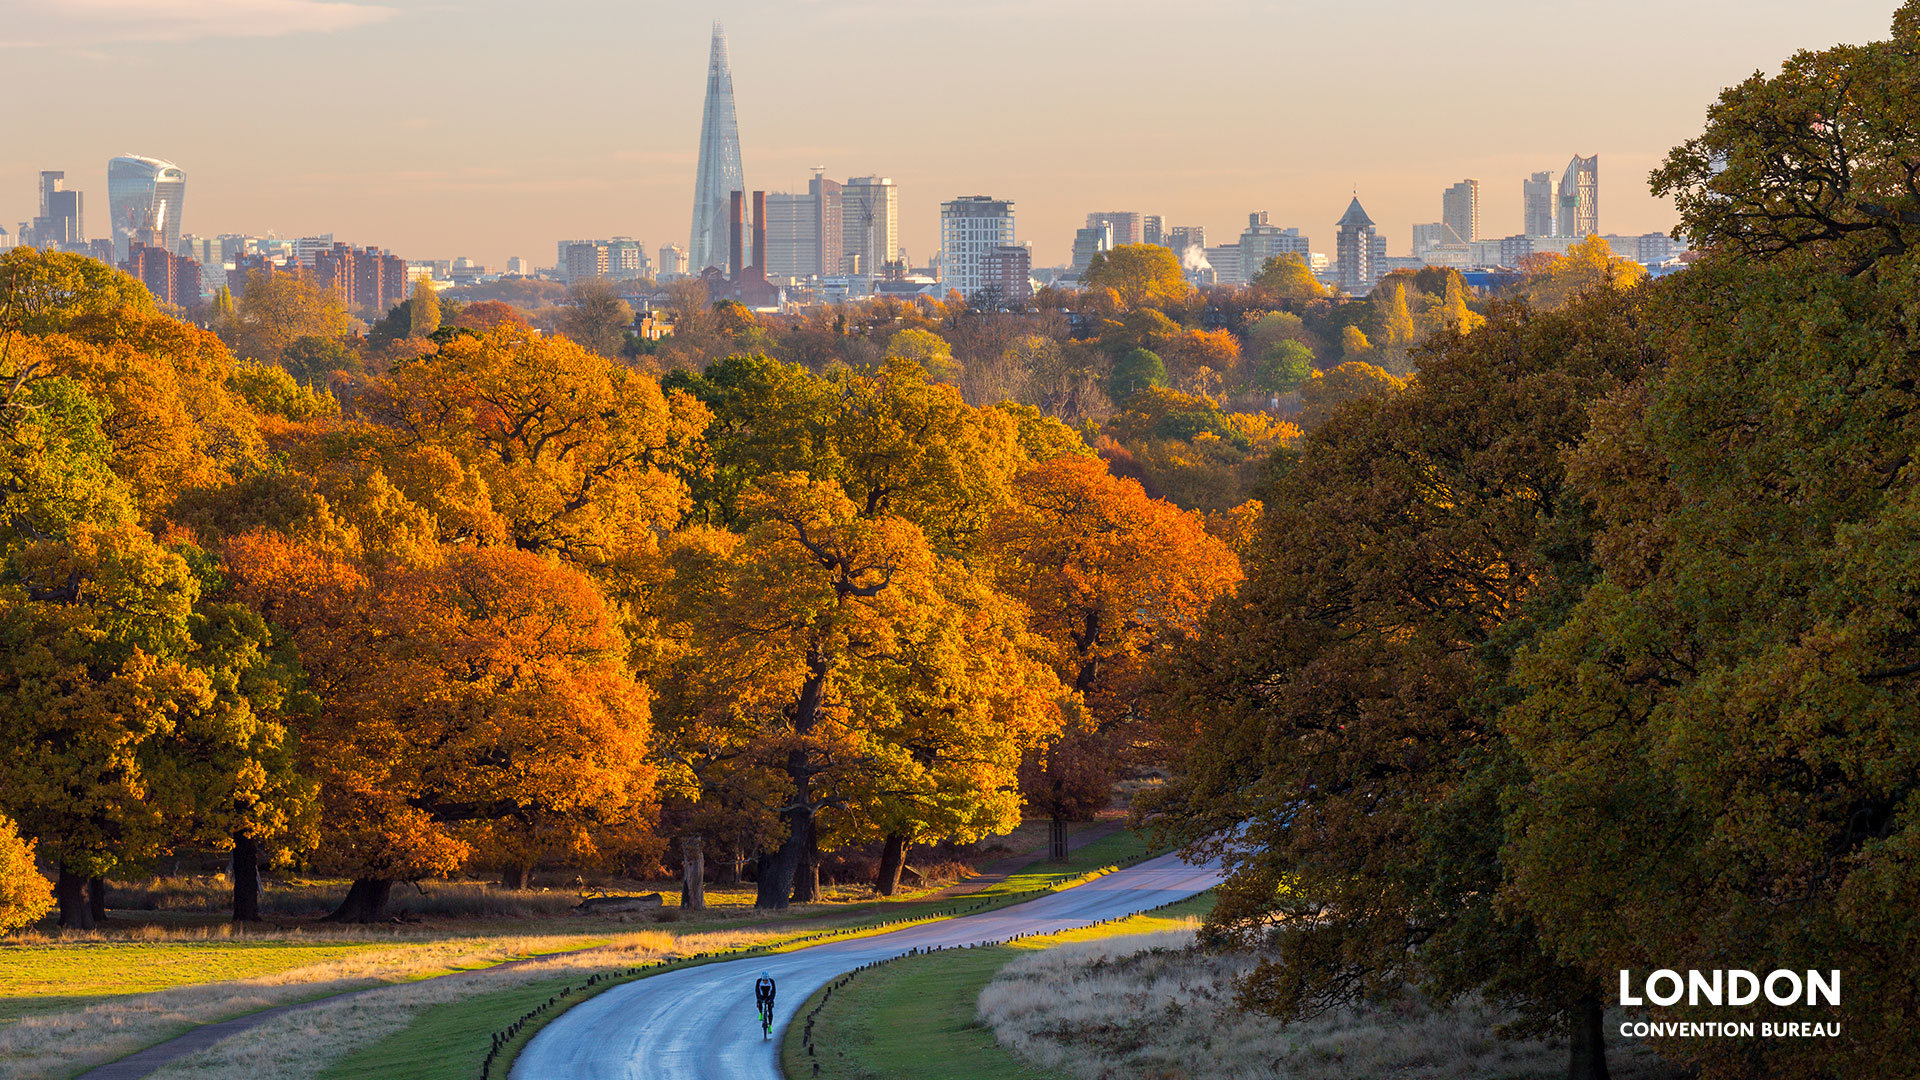 Orange trees in autumn at Richmond park and the London skyline peaking in the background.